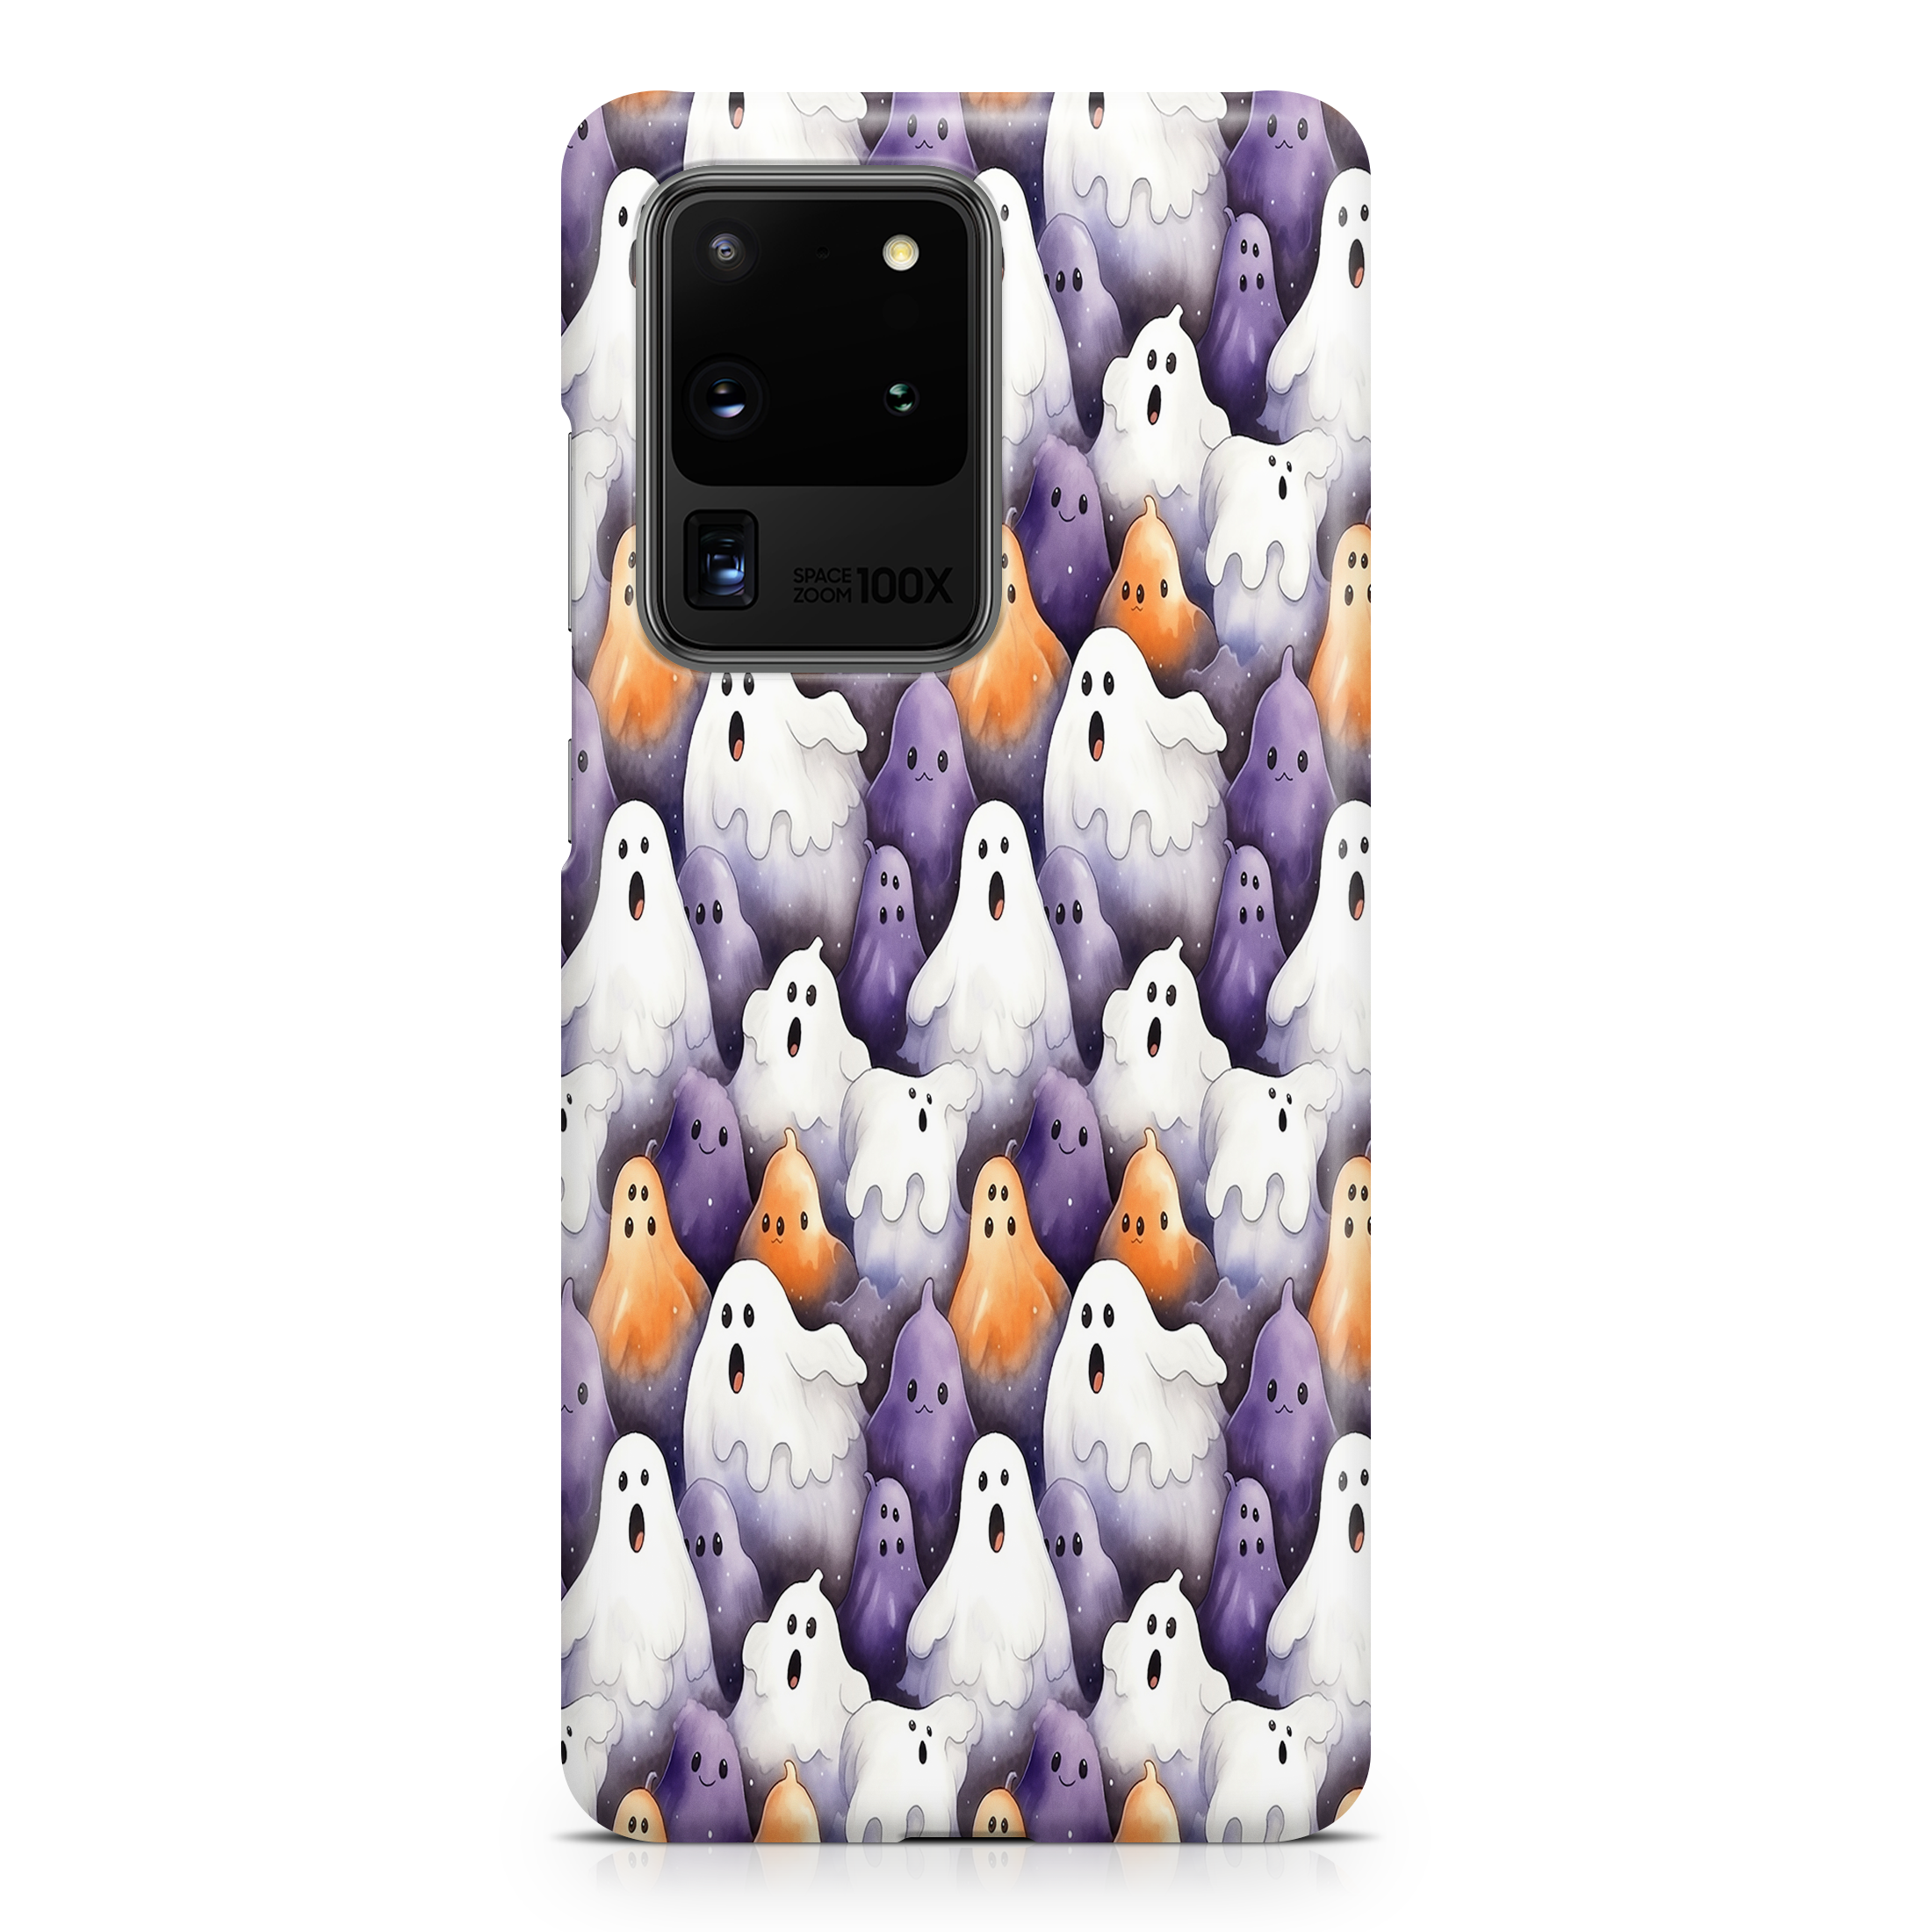 Spooky Ghosts - Samsung phone case designs by CaseSwagger